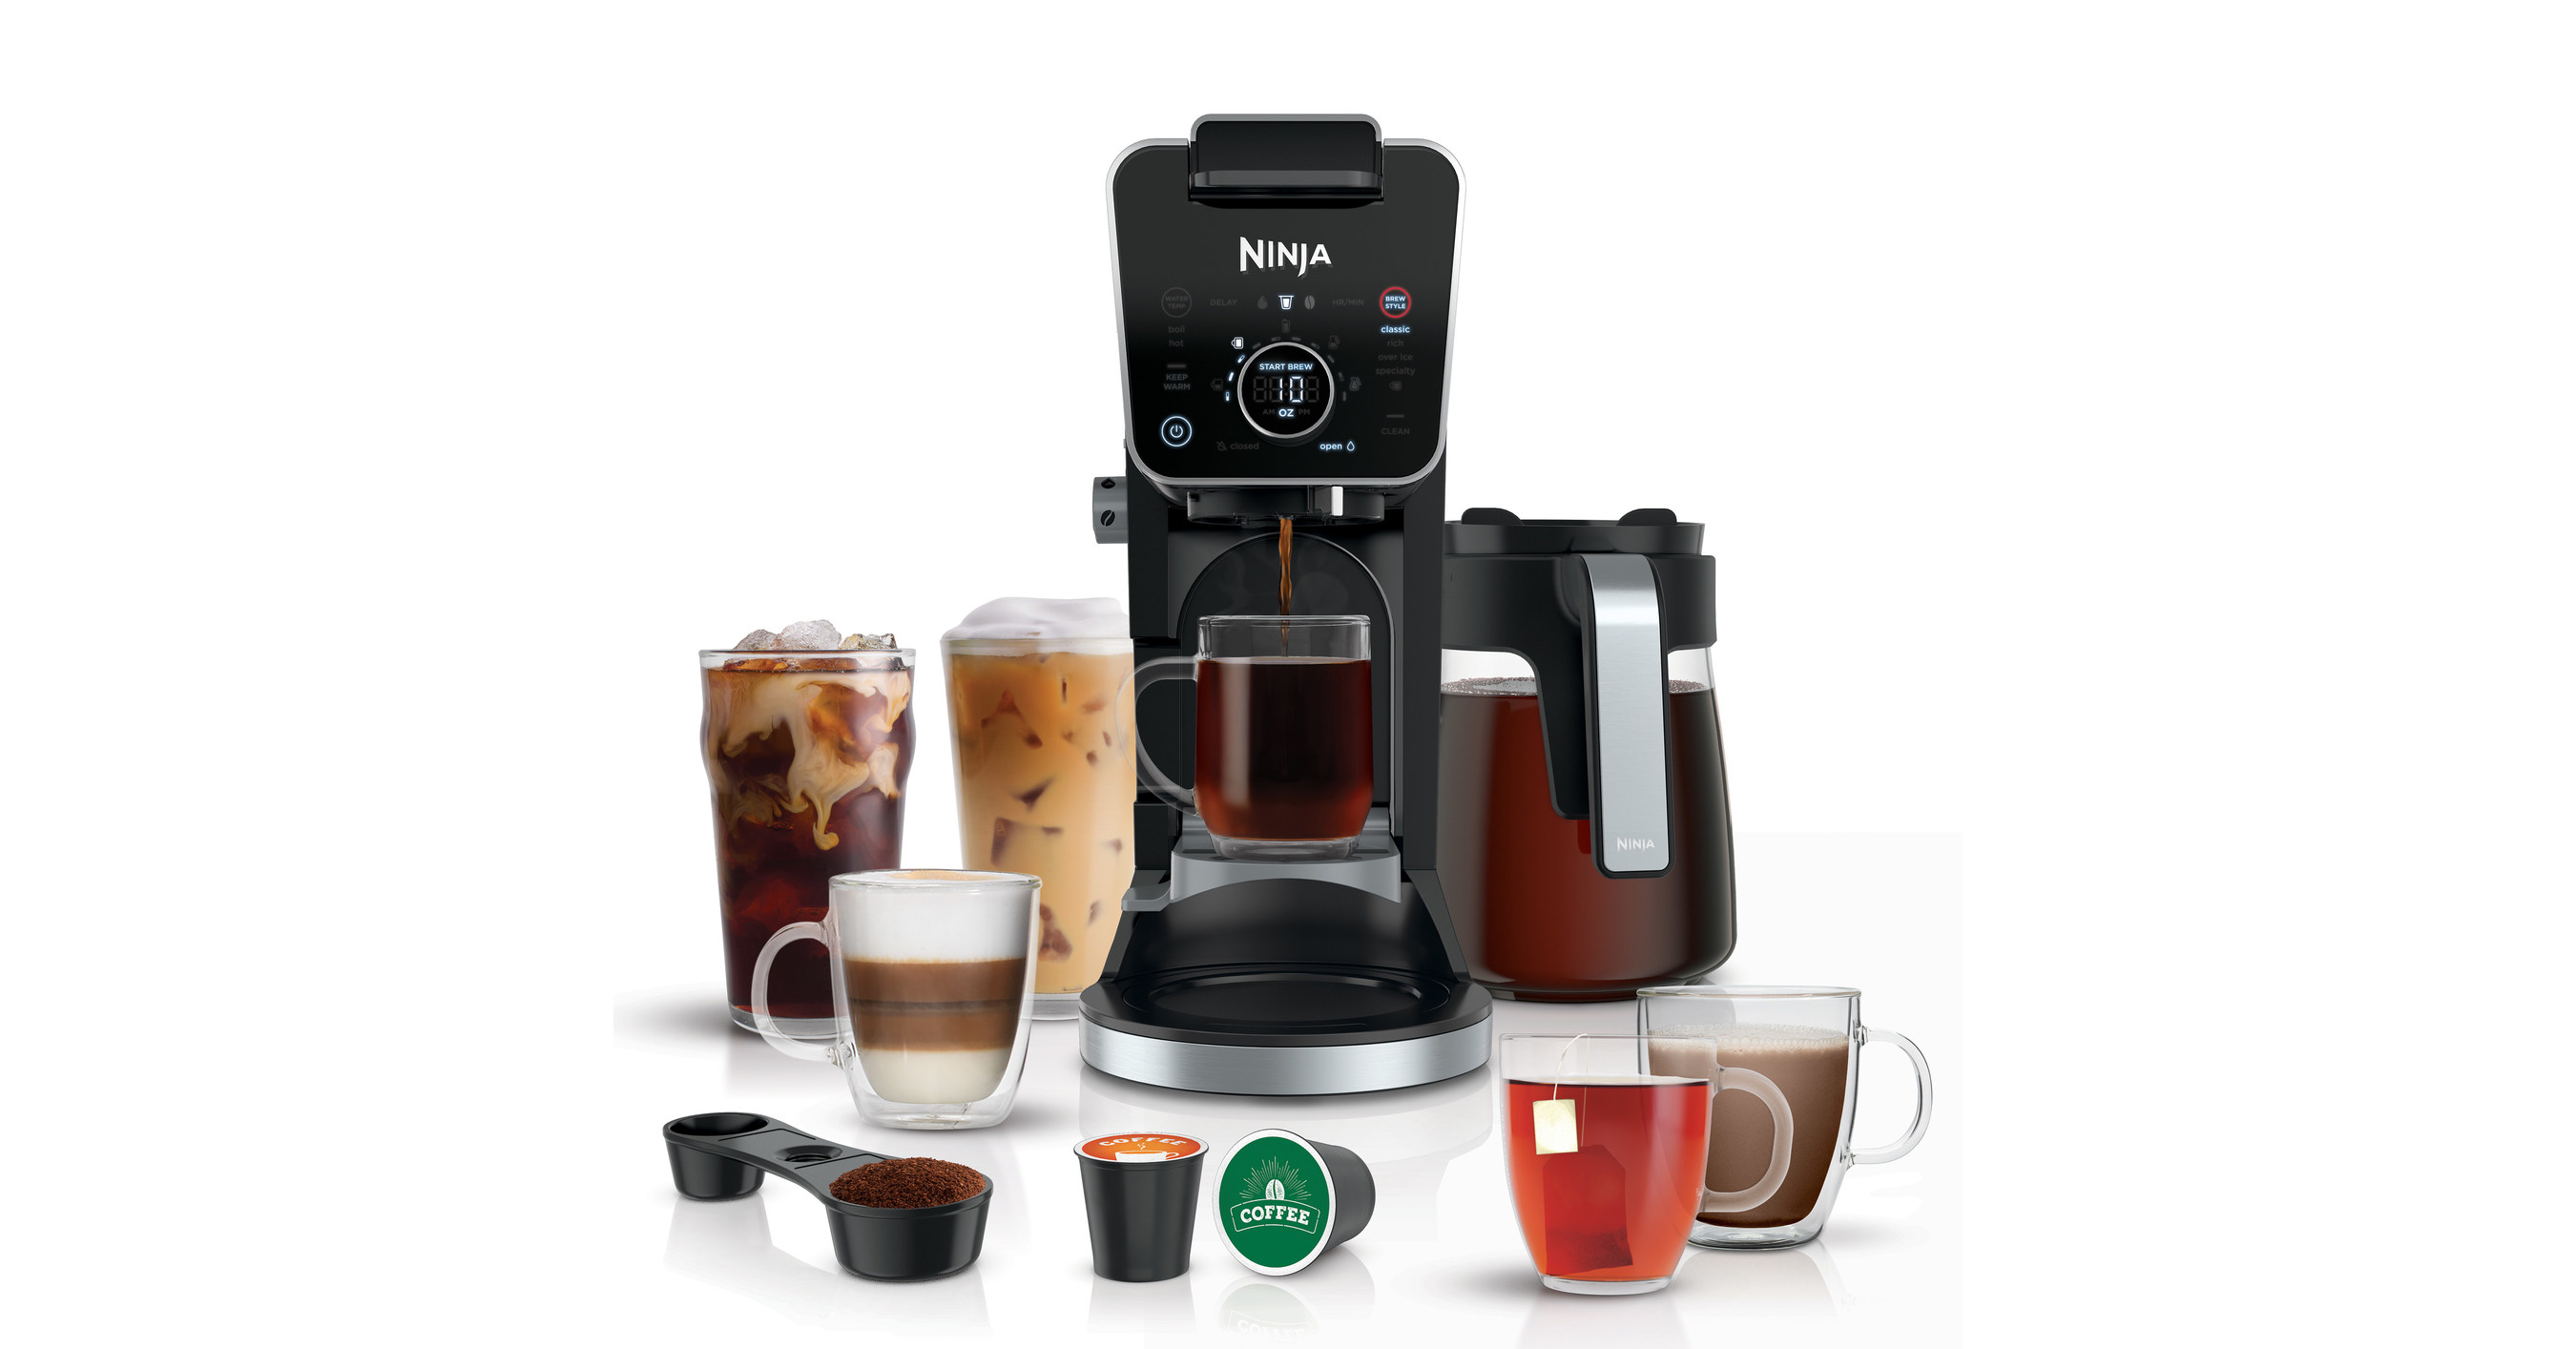 Flex Brew Coffee Makers: Finding Versatility in Brewing